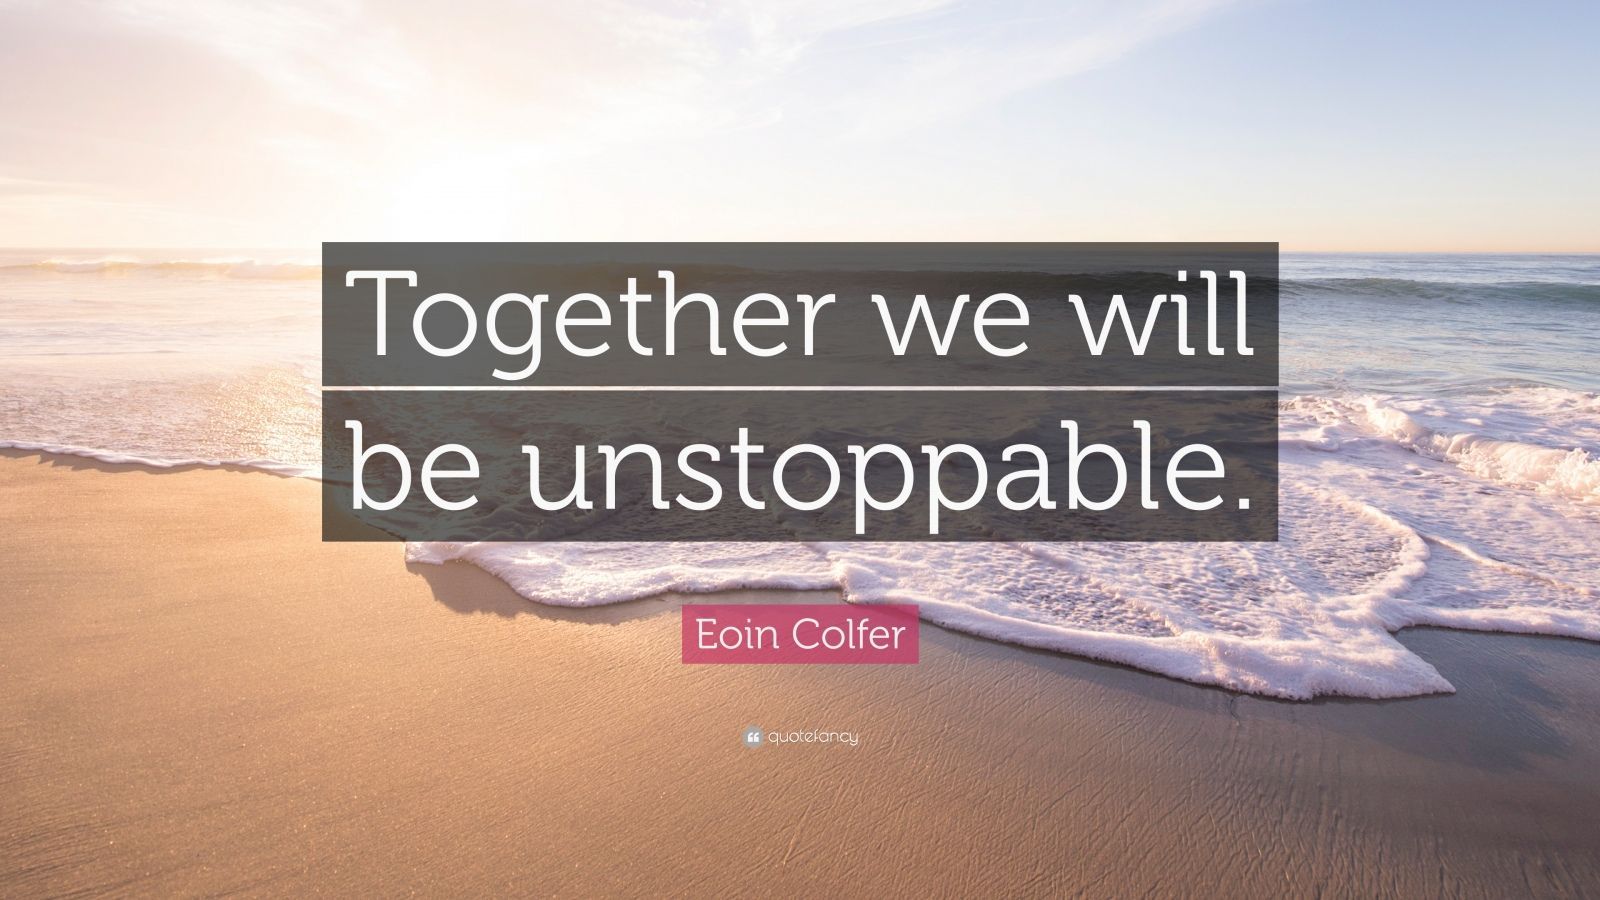 Eoin Colfer Quote: “Together we will be unstoppable.” (12 wallpaper)